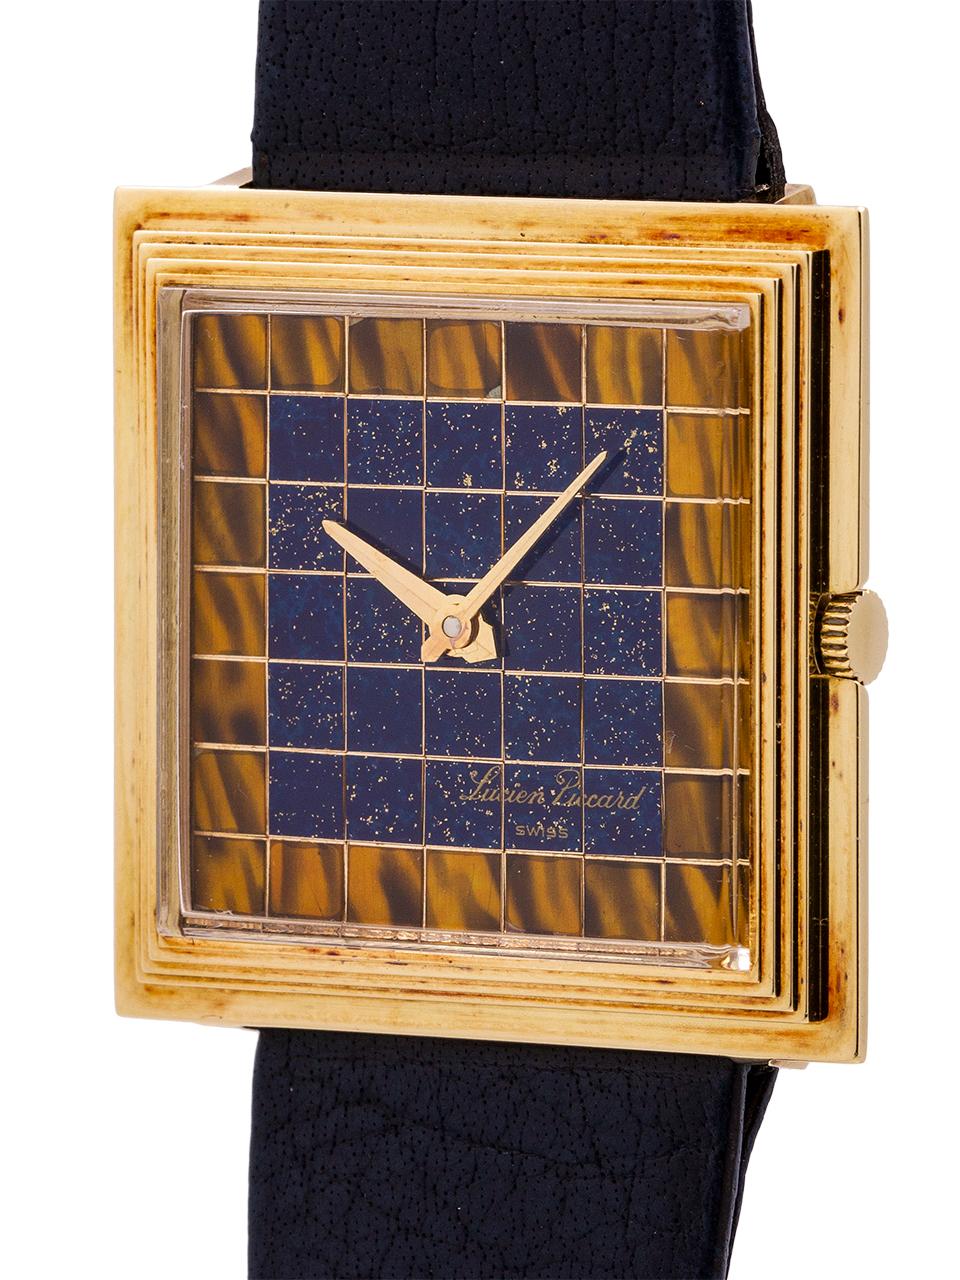 
Stunning and stylish mid century design Lucien Piccard 14K YG manual wind dress model. Featuring a distinctive mint condition 31 X 30mm square case with fine wide, stepped and sloped bezel, and remarkable checkerboard pattern dial with center Lapis